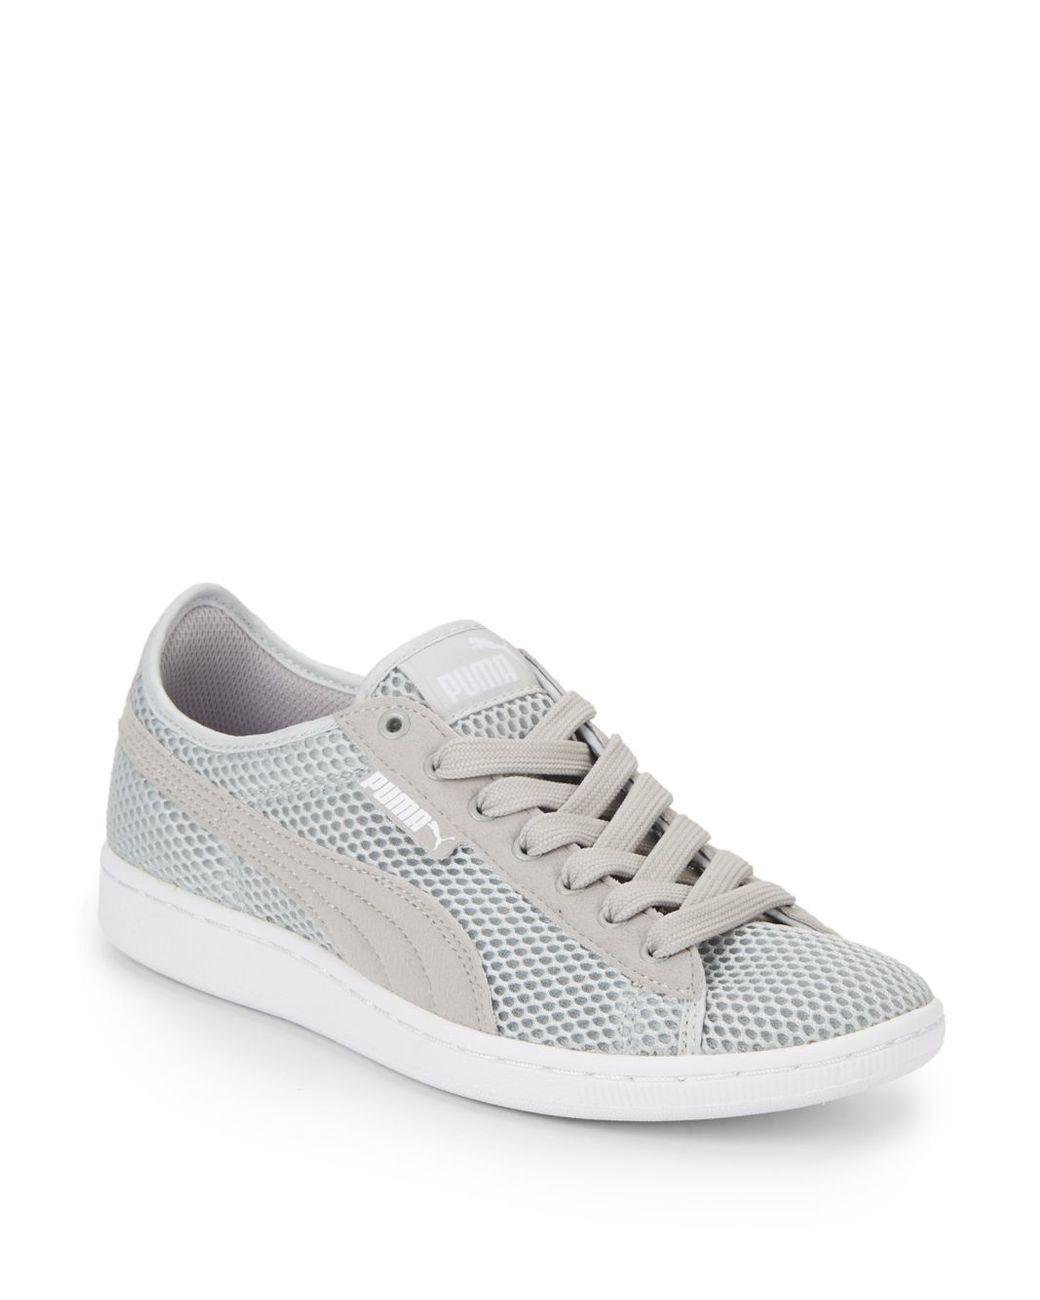 PUMA Vikky Mesh Sneakers in Gray | Lyst